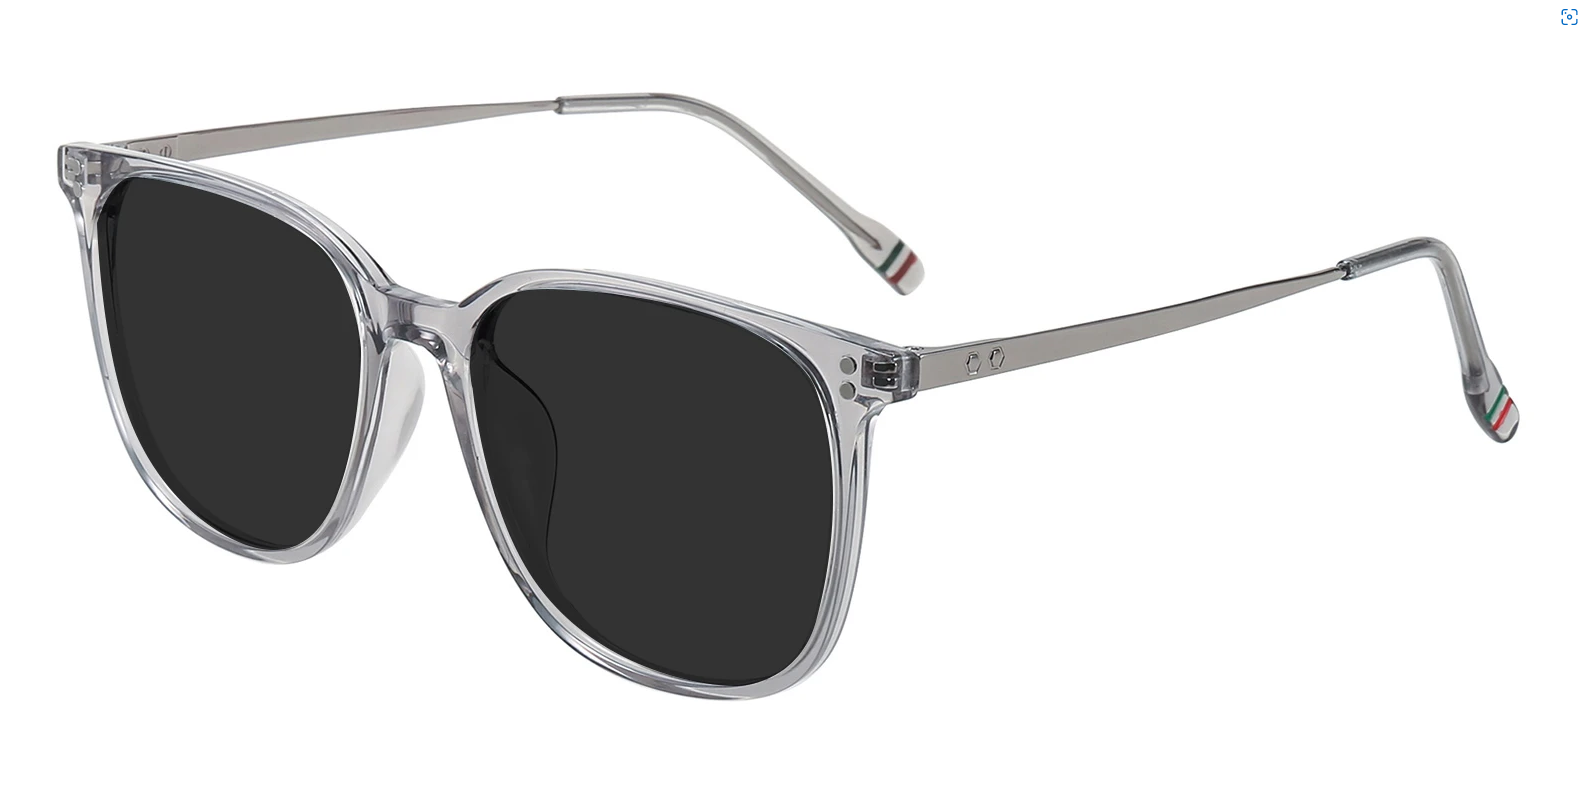 Grey Glasses Frames: Your Daily Spectacles